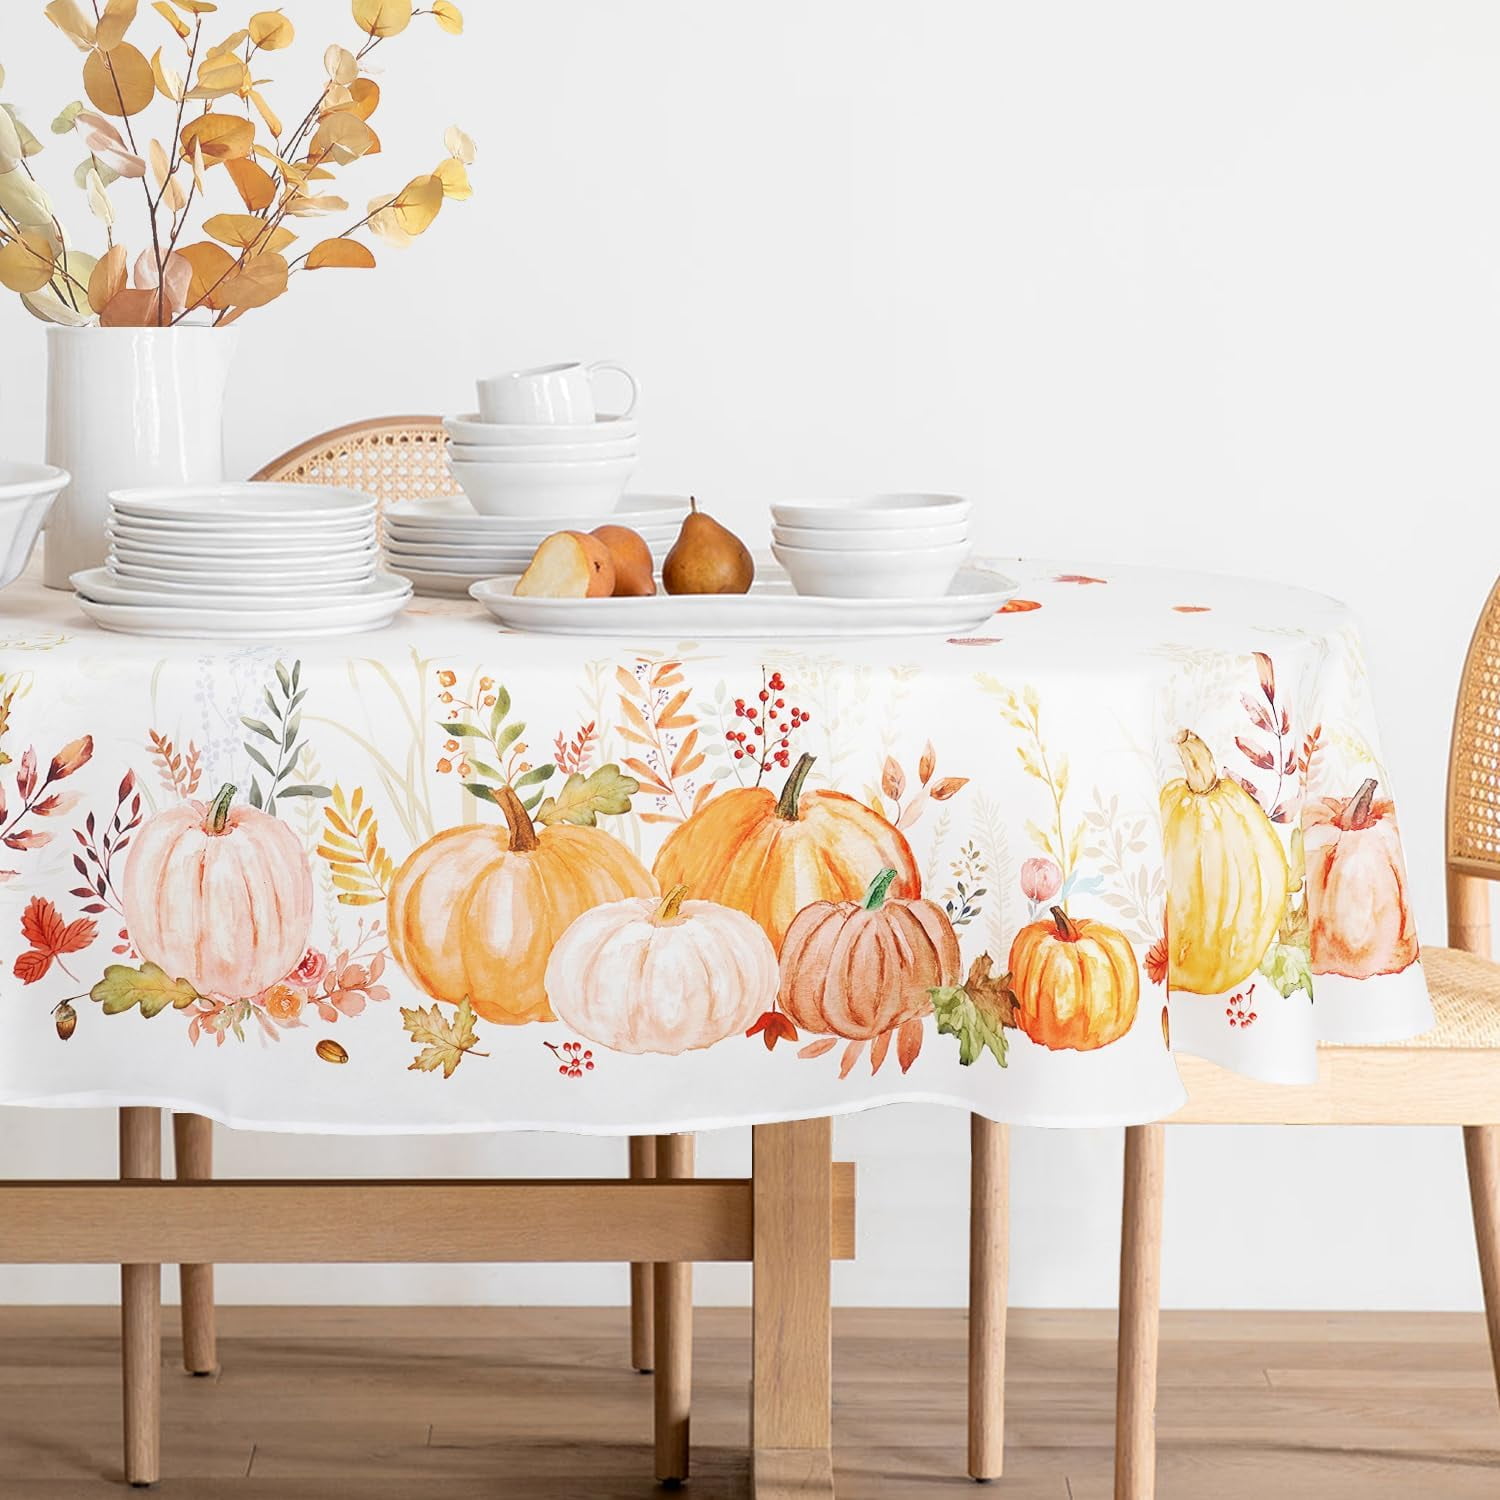 Oval Fall Tablecloth Thanksgiving Tablecloth Oval Autumn Table Cloths ...